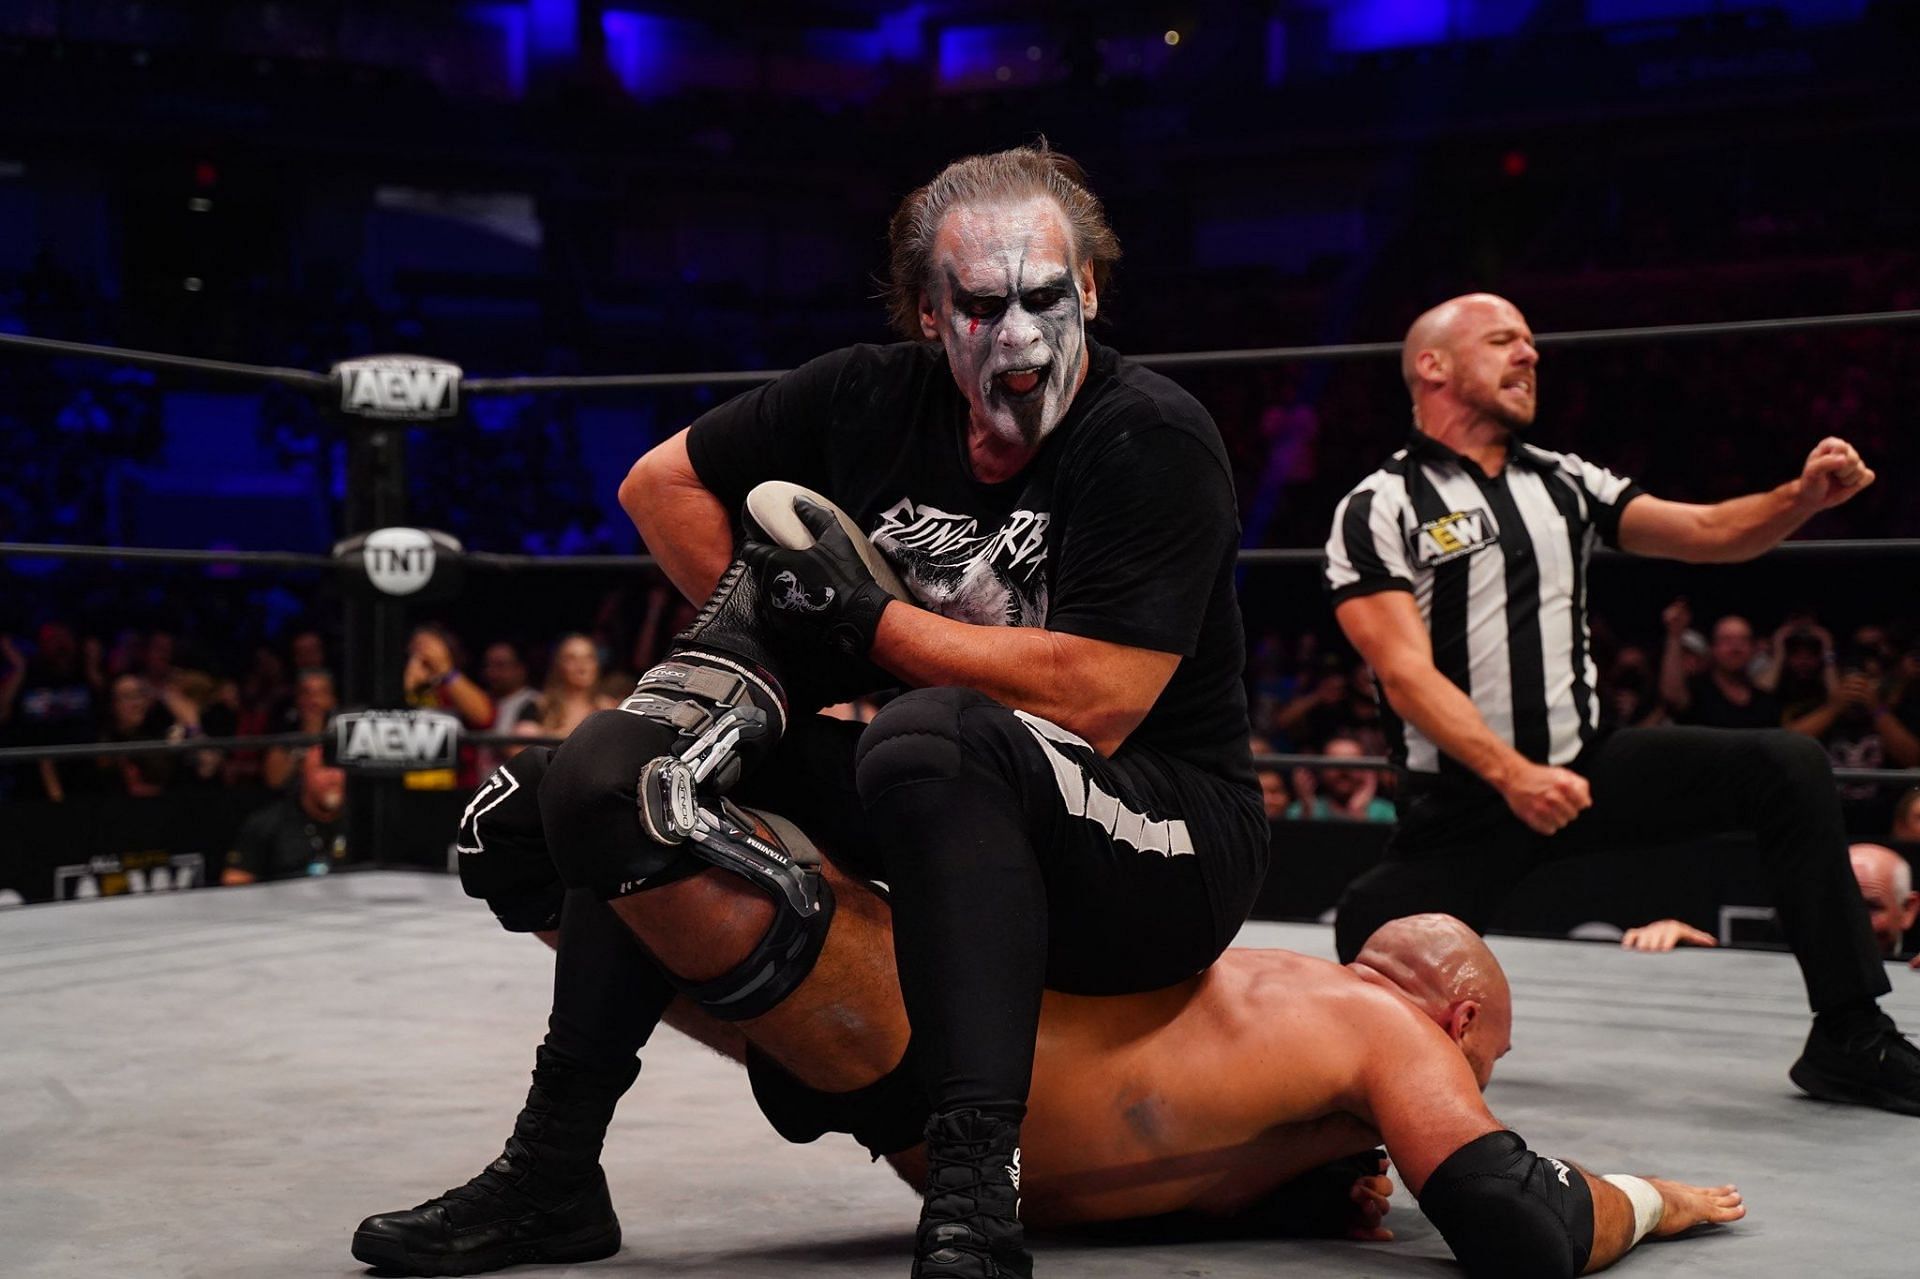 Darby Allin will be teaming up with Sting on AEW Dynamite